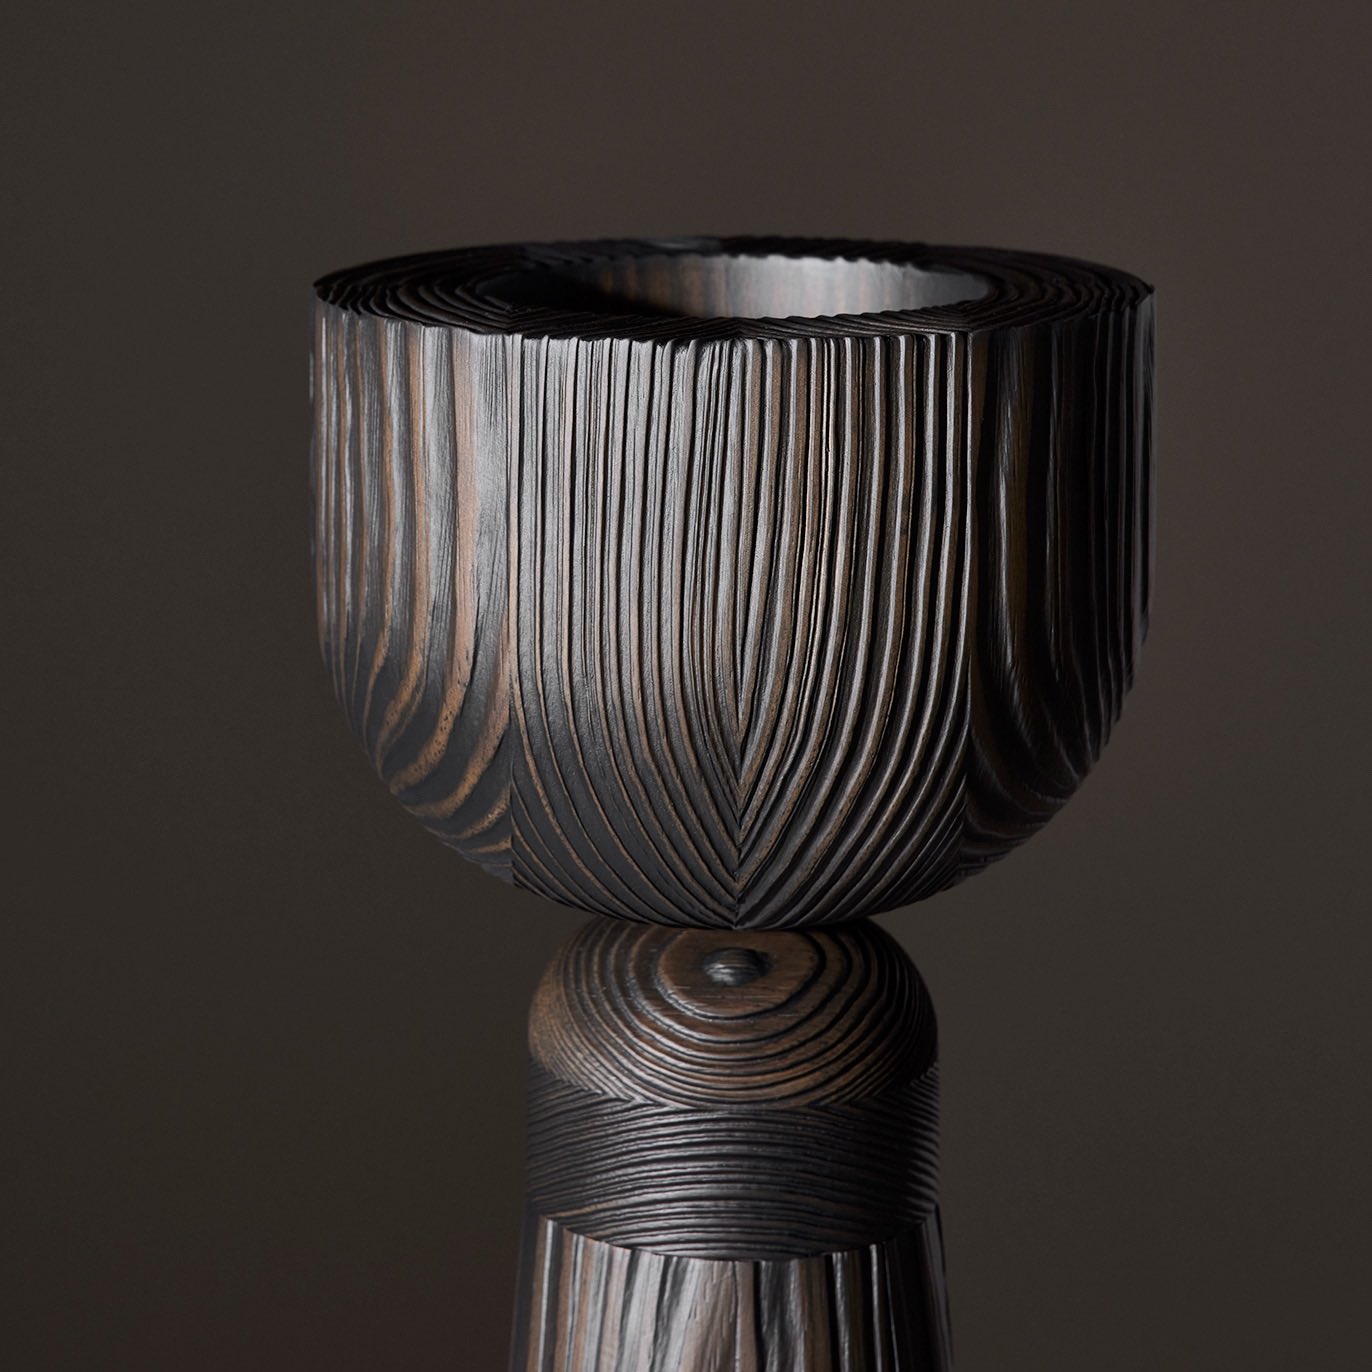 CHALICE-VASE-ARNO-DECLERCQ-COLLECTION_PARTICULIERE